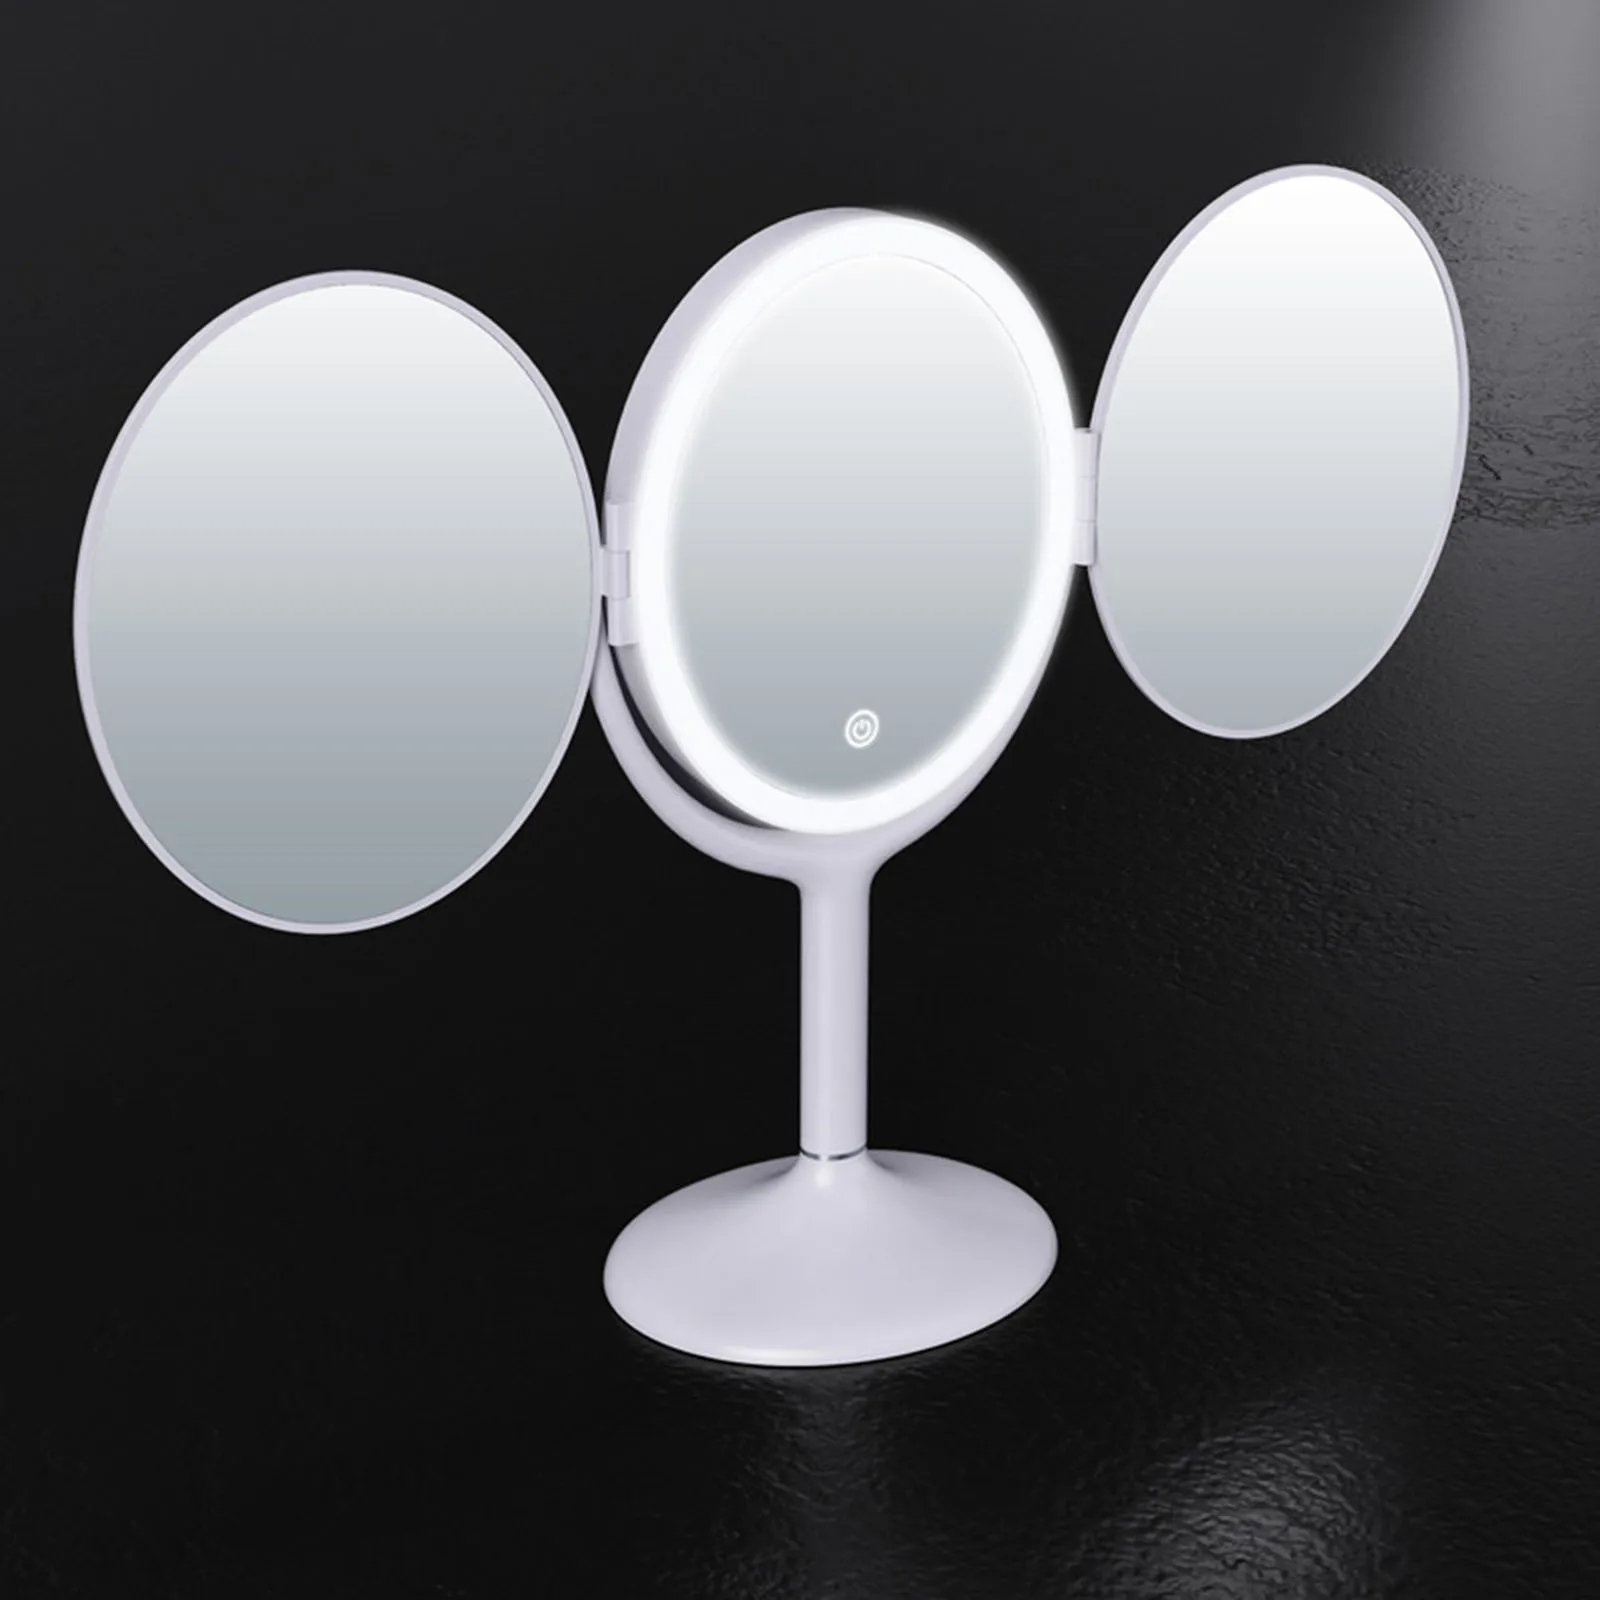 Makeup Mirror Vanity Mirror with 3 Color Lighting Modes Trifold Mirror with Touch Screen, 1X 2X Magnification Lighted Up Mirror